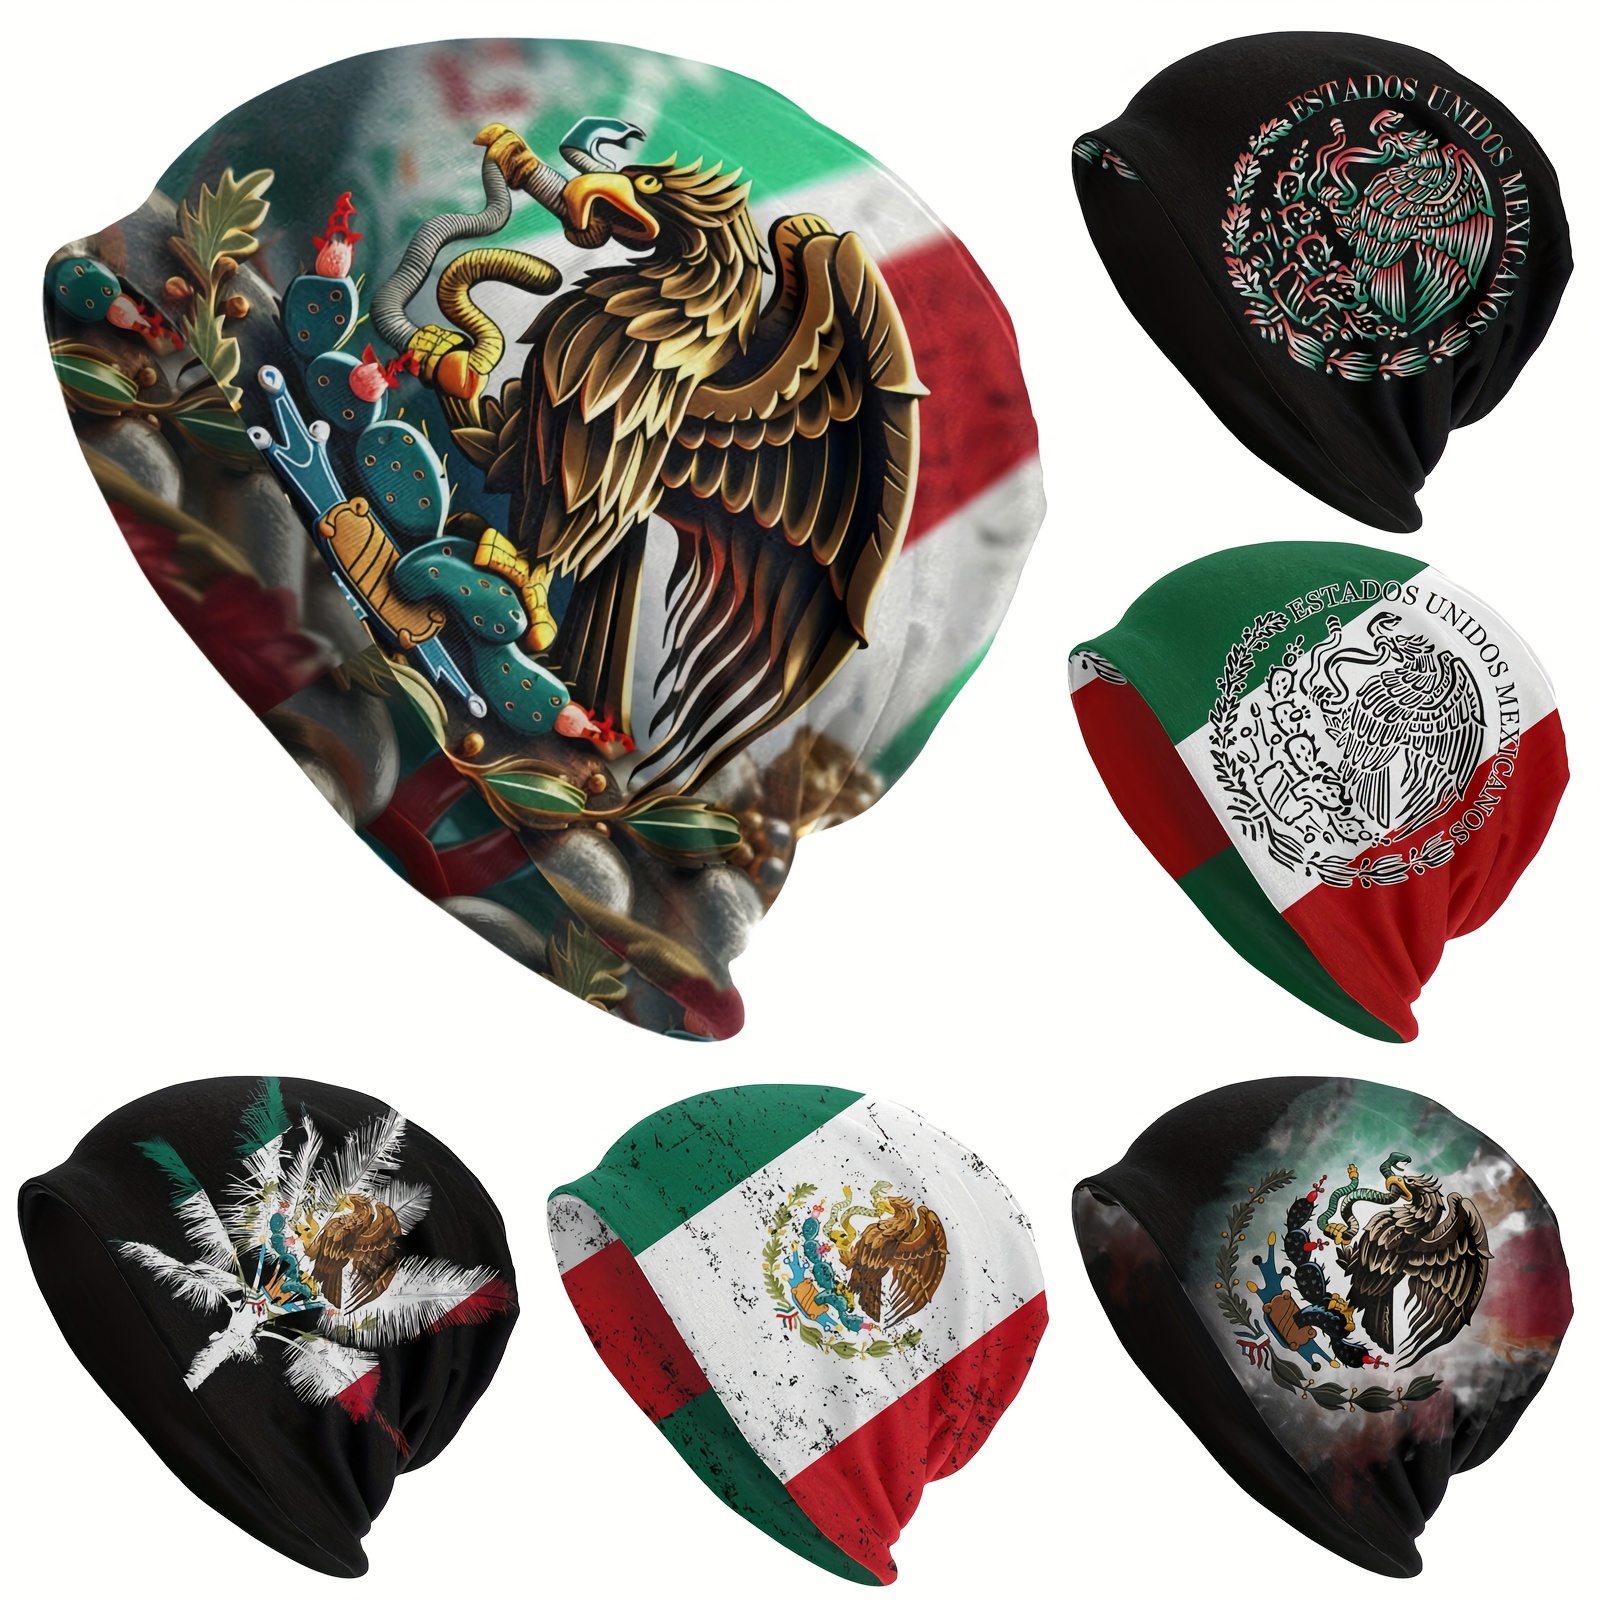 Skull with Cap and Mexican Flag Bandanna embroidered Patch